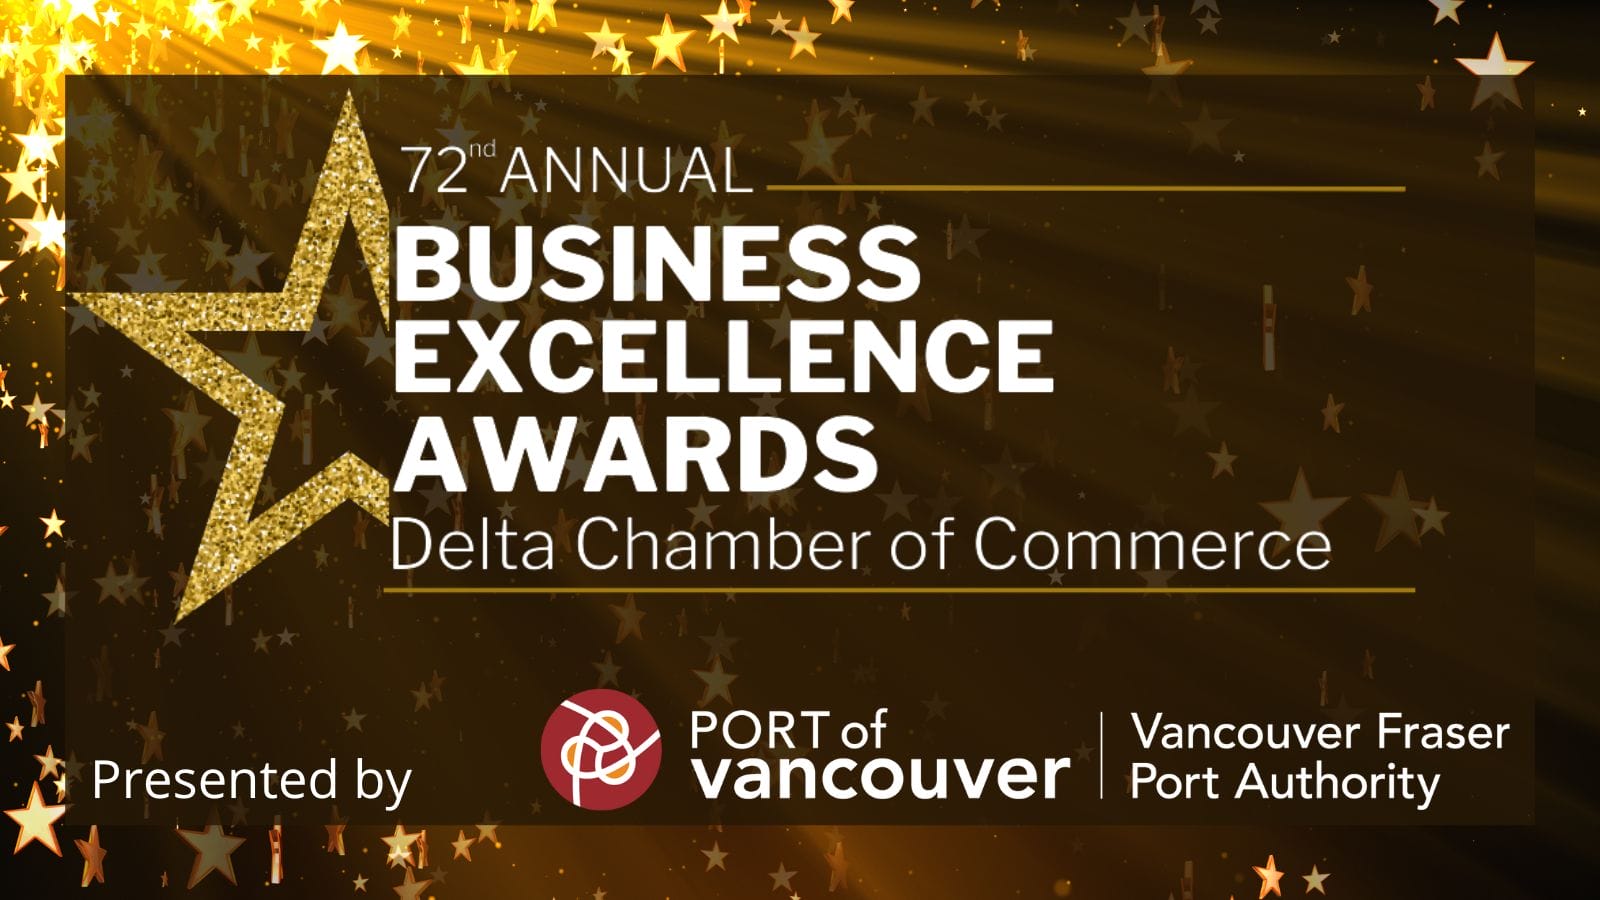 72nd Annual Business Excellence Awards, presented by Port of Vancouver - Vancouver Fraser Port Authority.